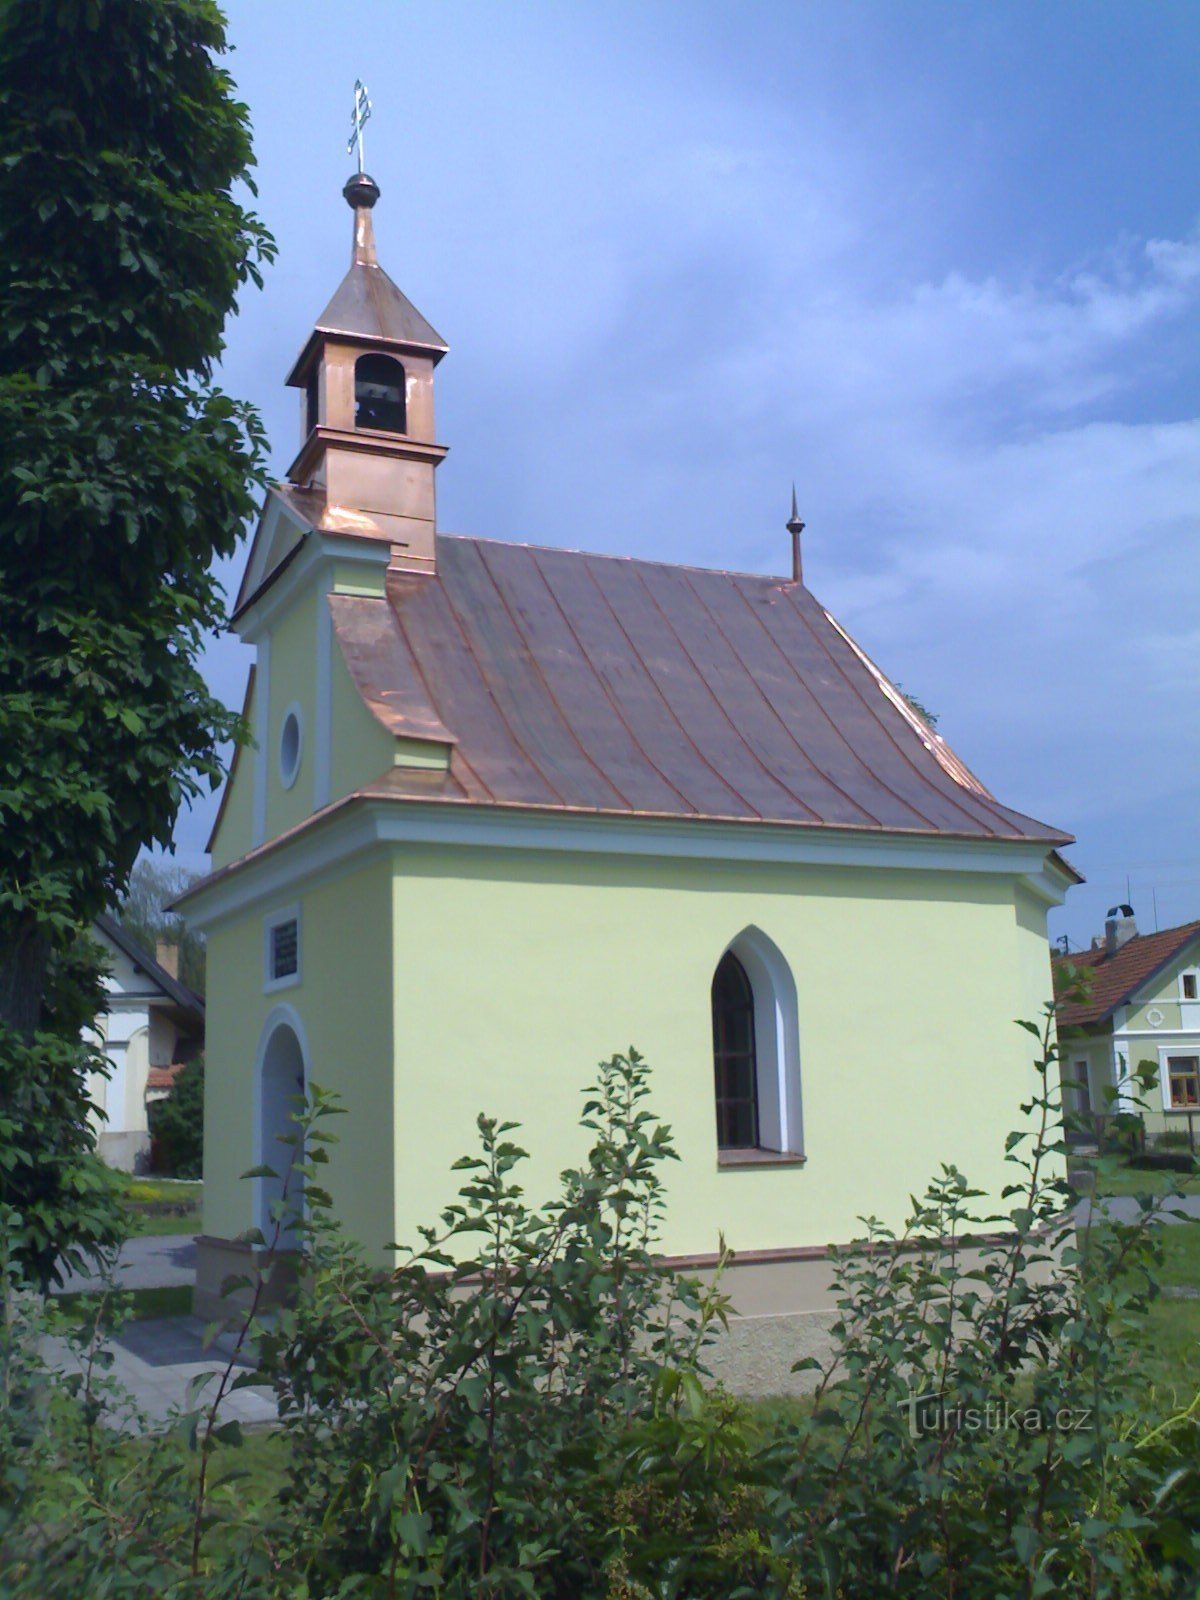 Očelice - Chapel of St. Peter and Paul